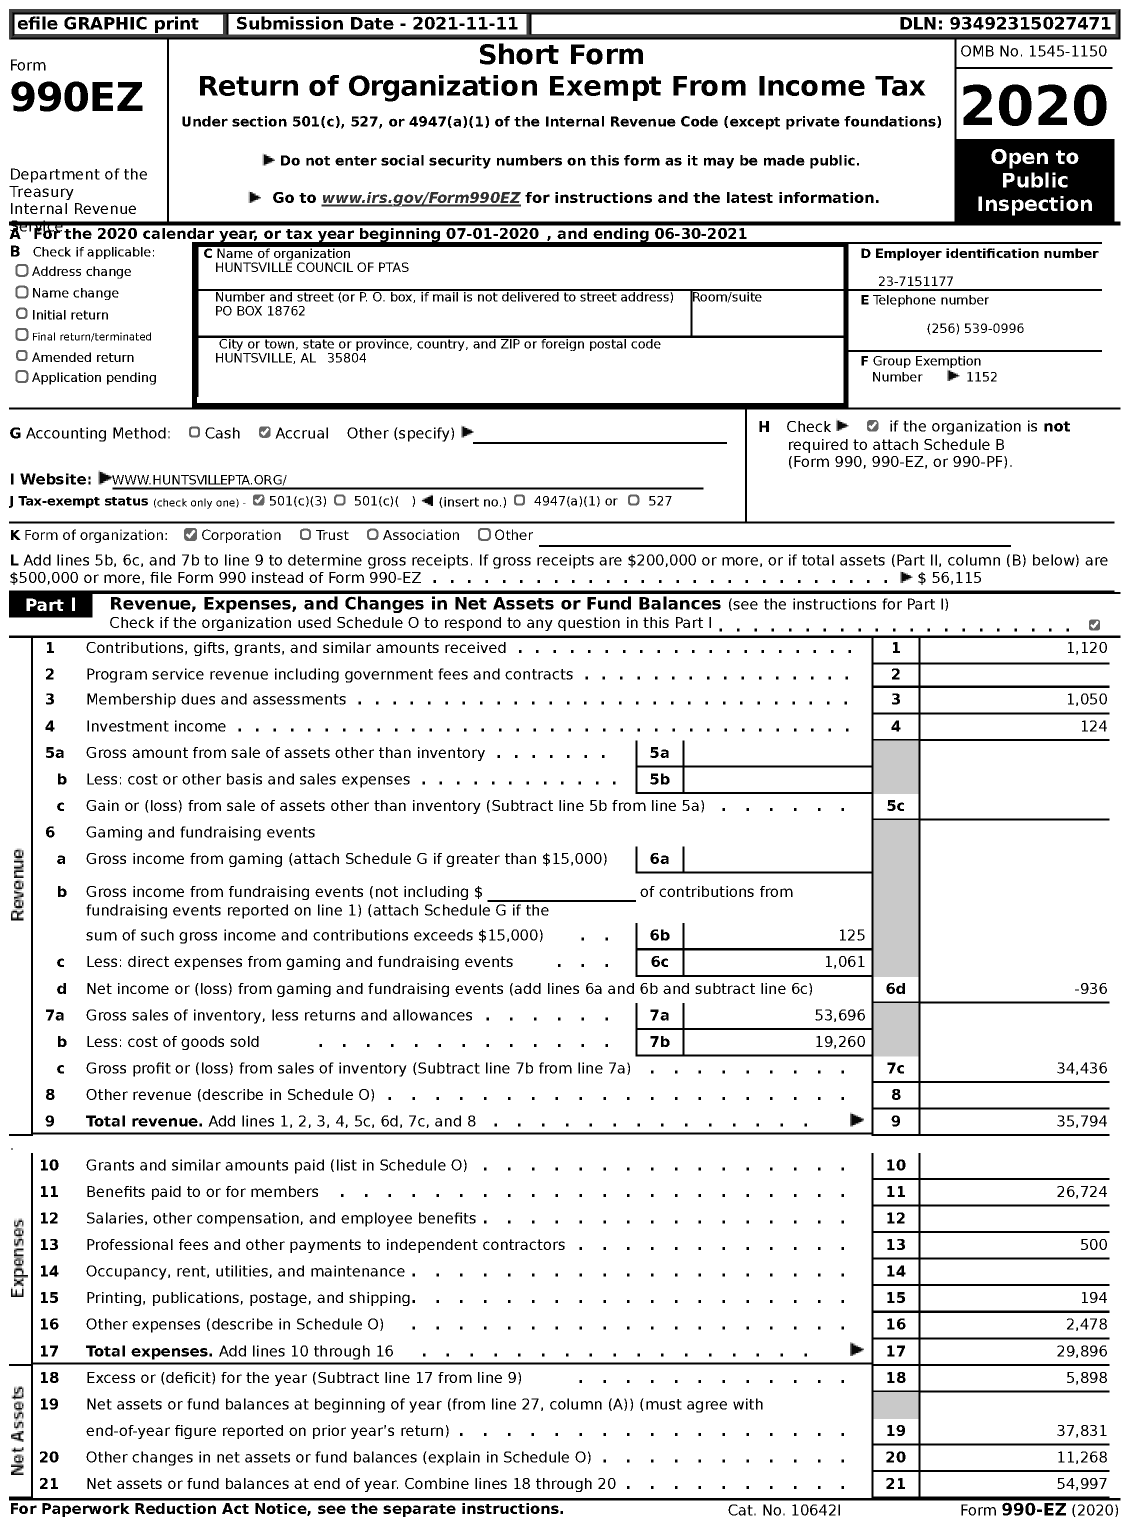 Image of first page of 2020 Form 990EZ for Huntsville Council of Ptas